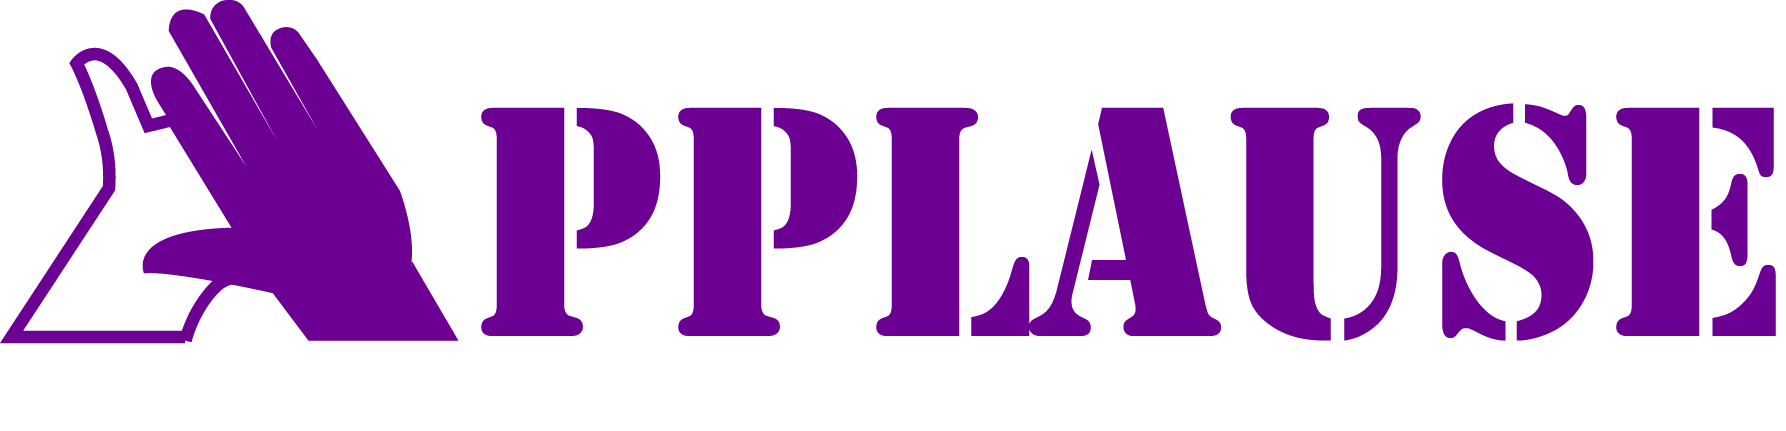 The band applause logo. Youtube clipart purple